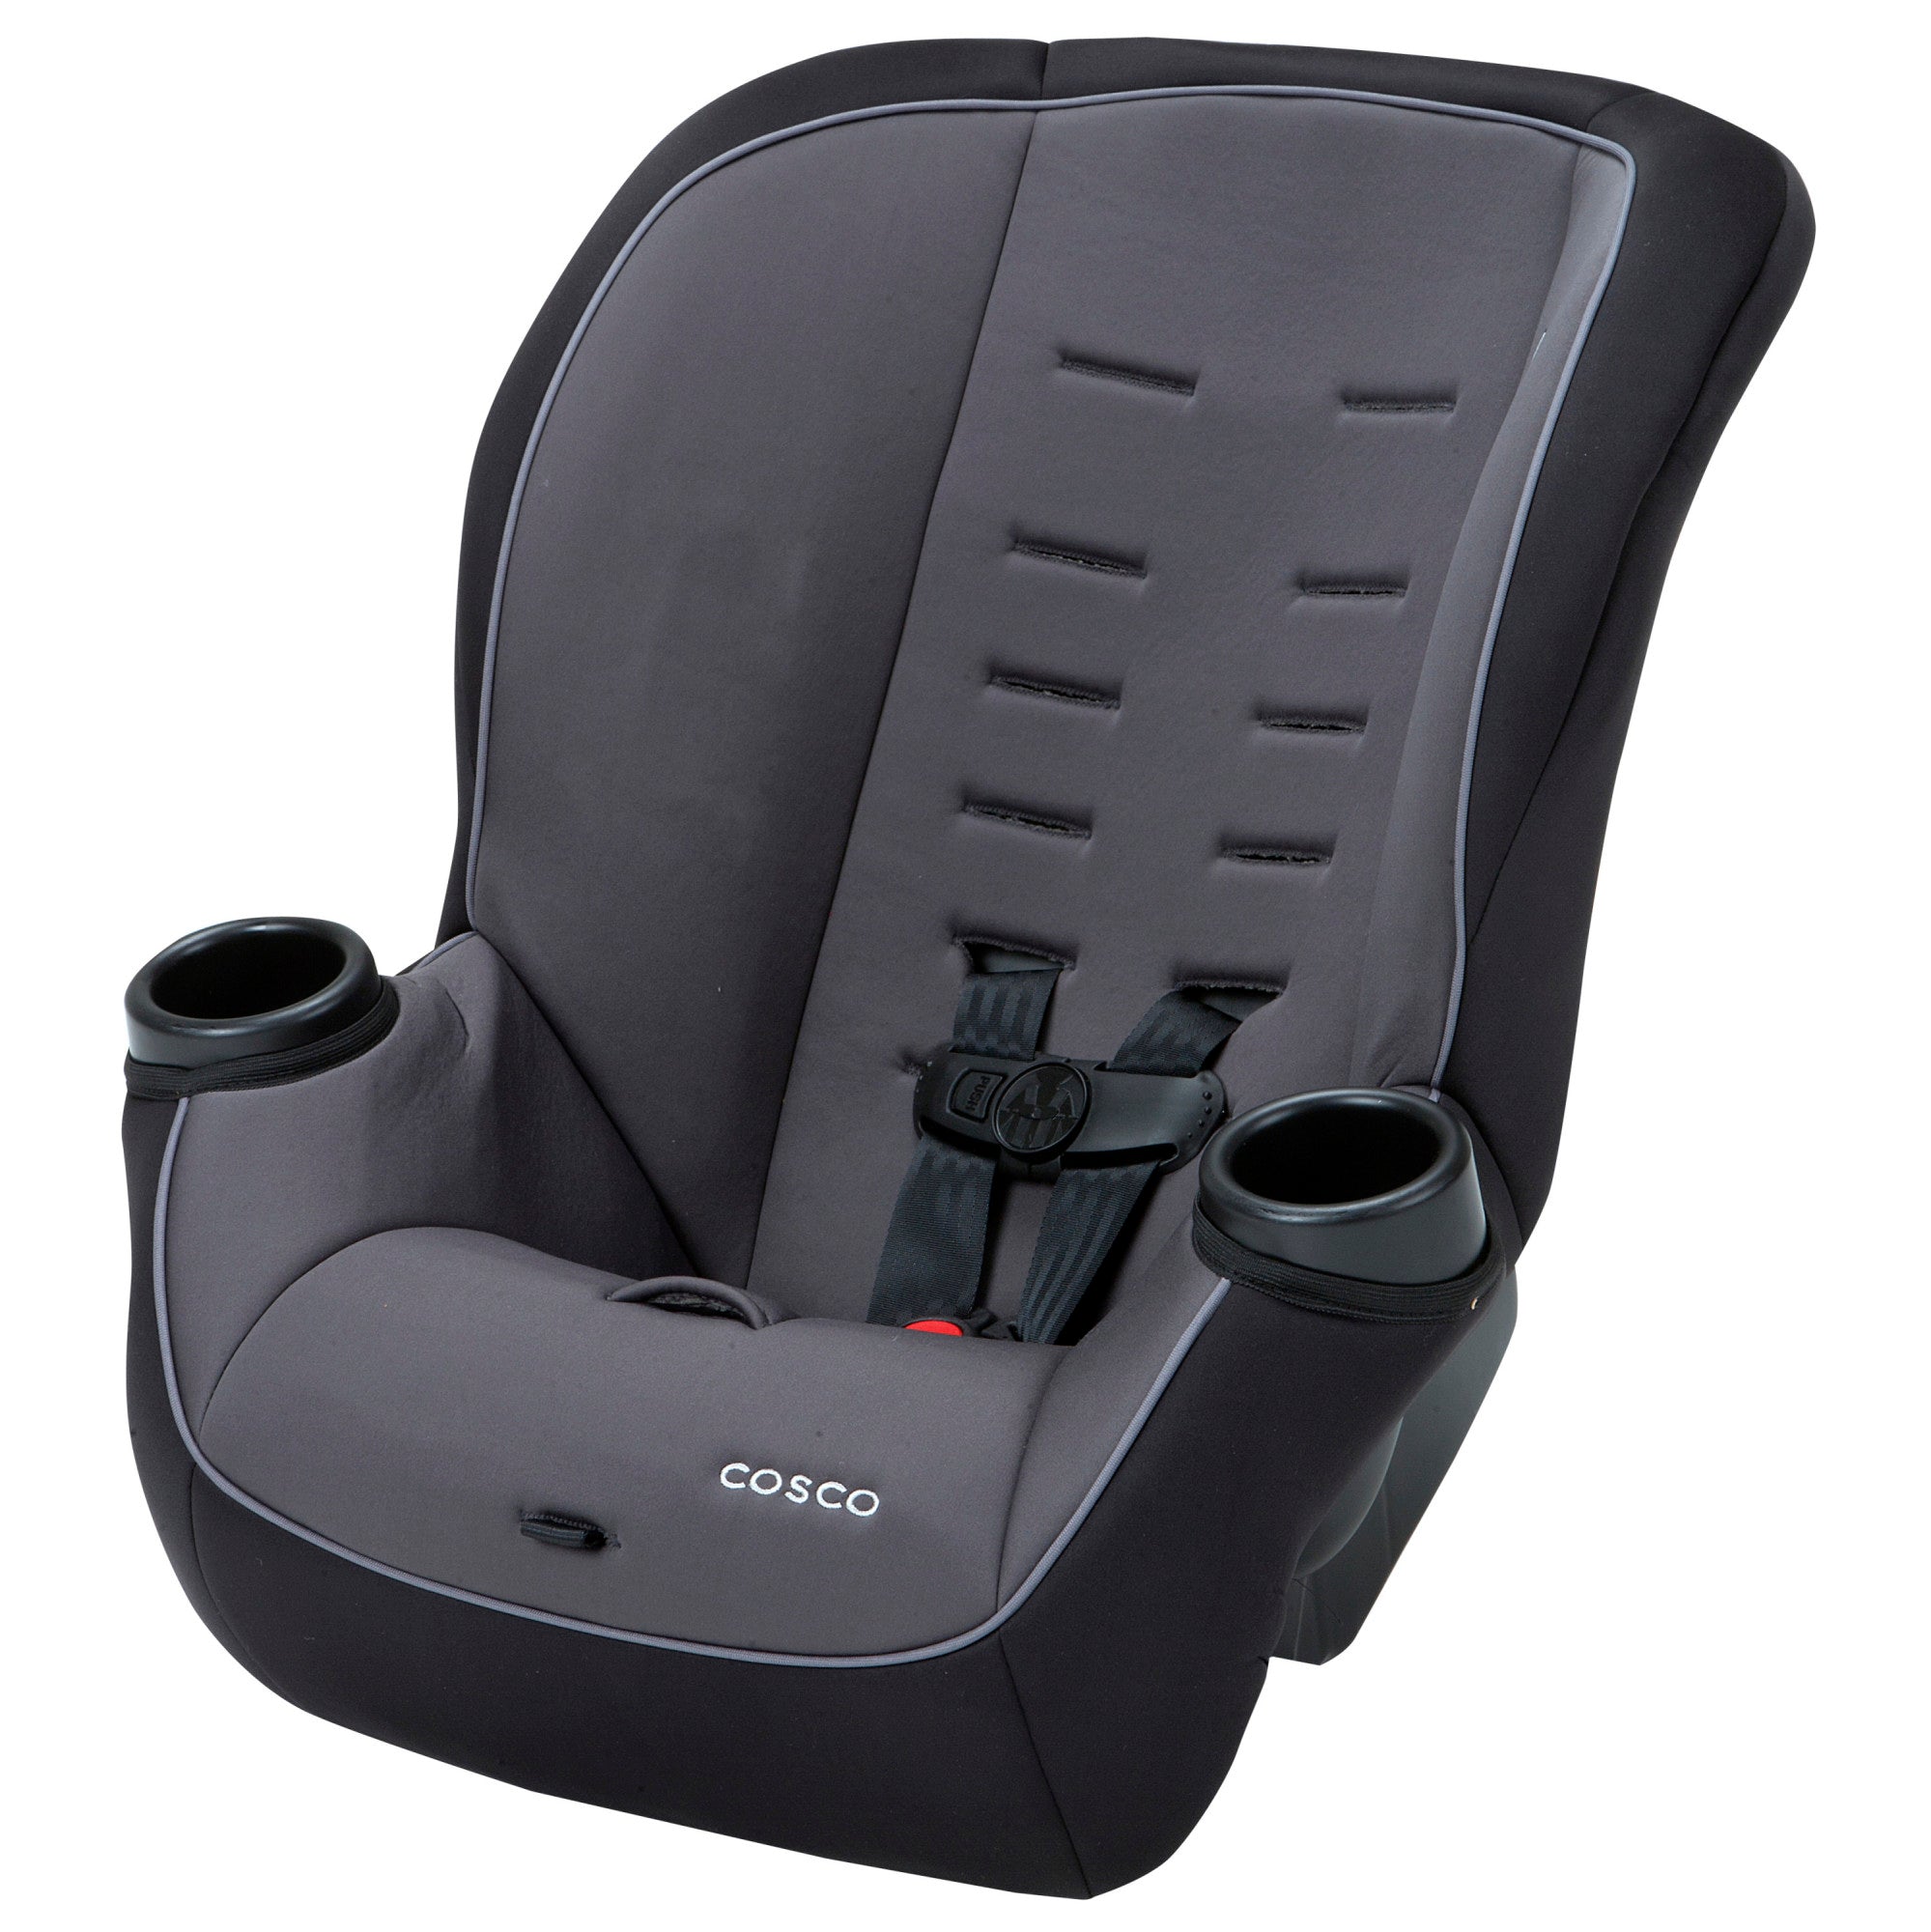 Onlook 2-in-1 Convertible Car Seat - Black Arrows - 45 degree angle view of left side